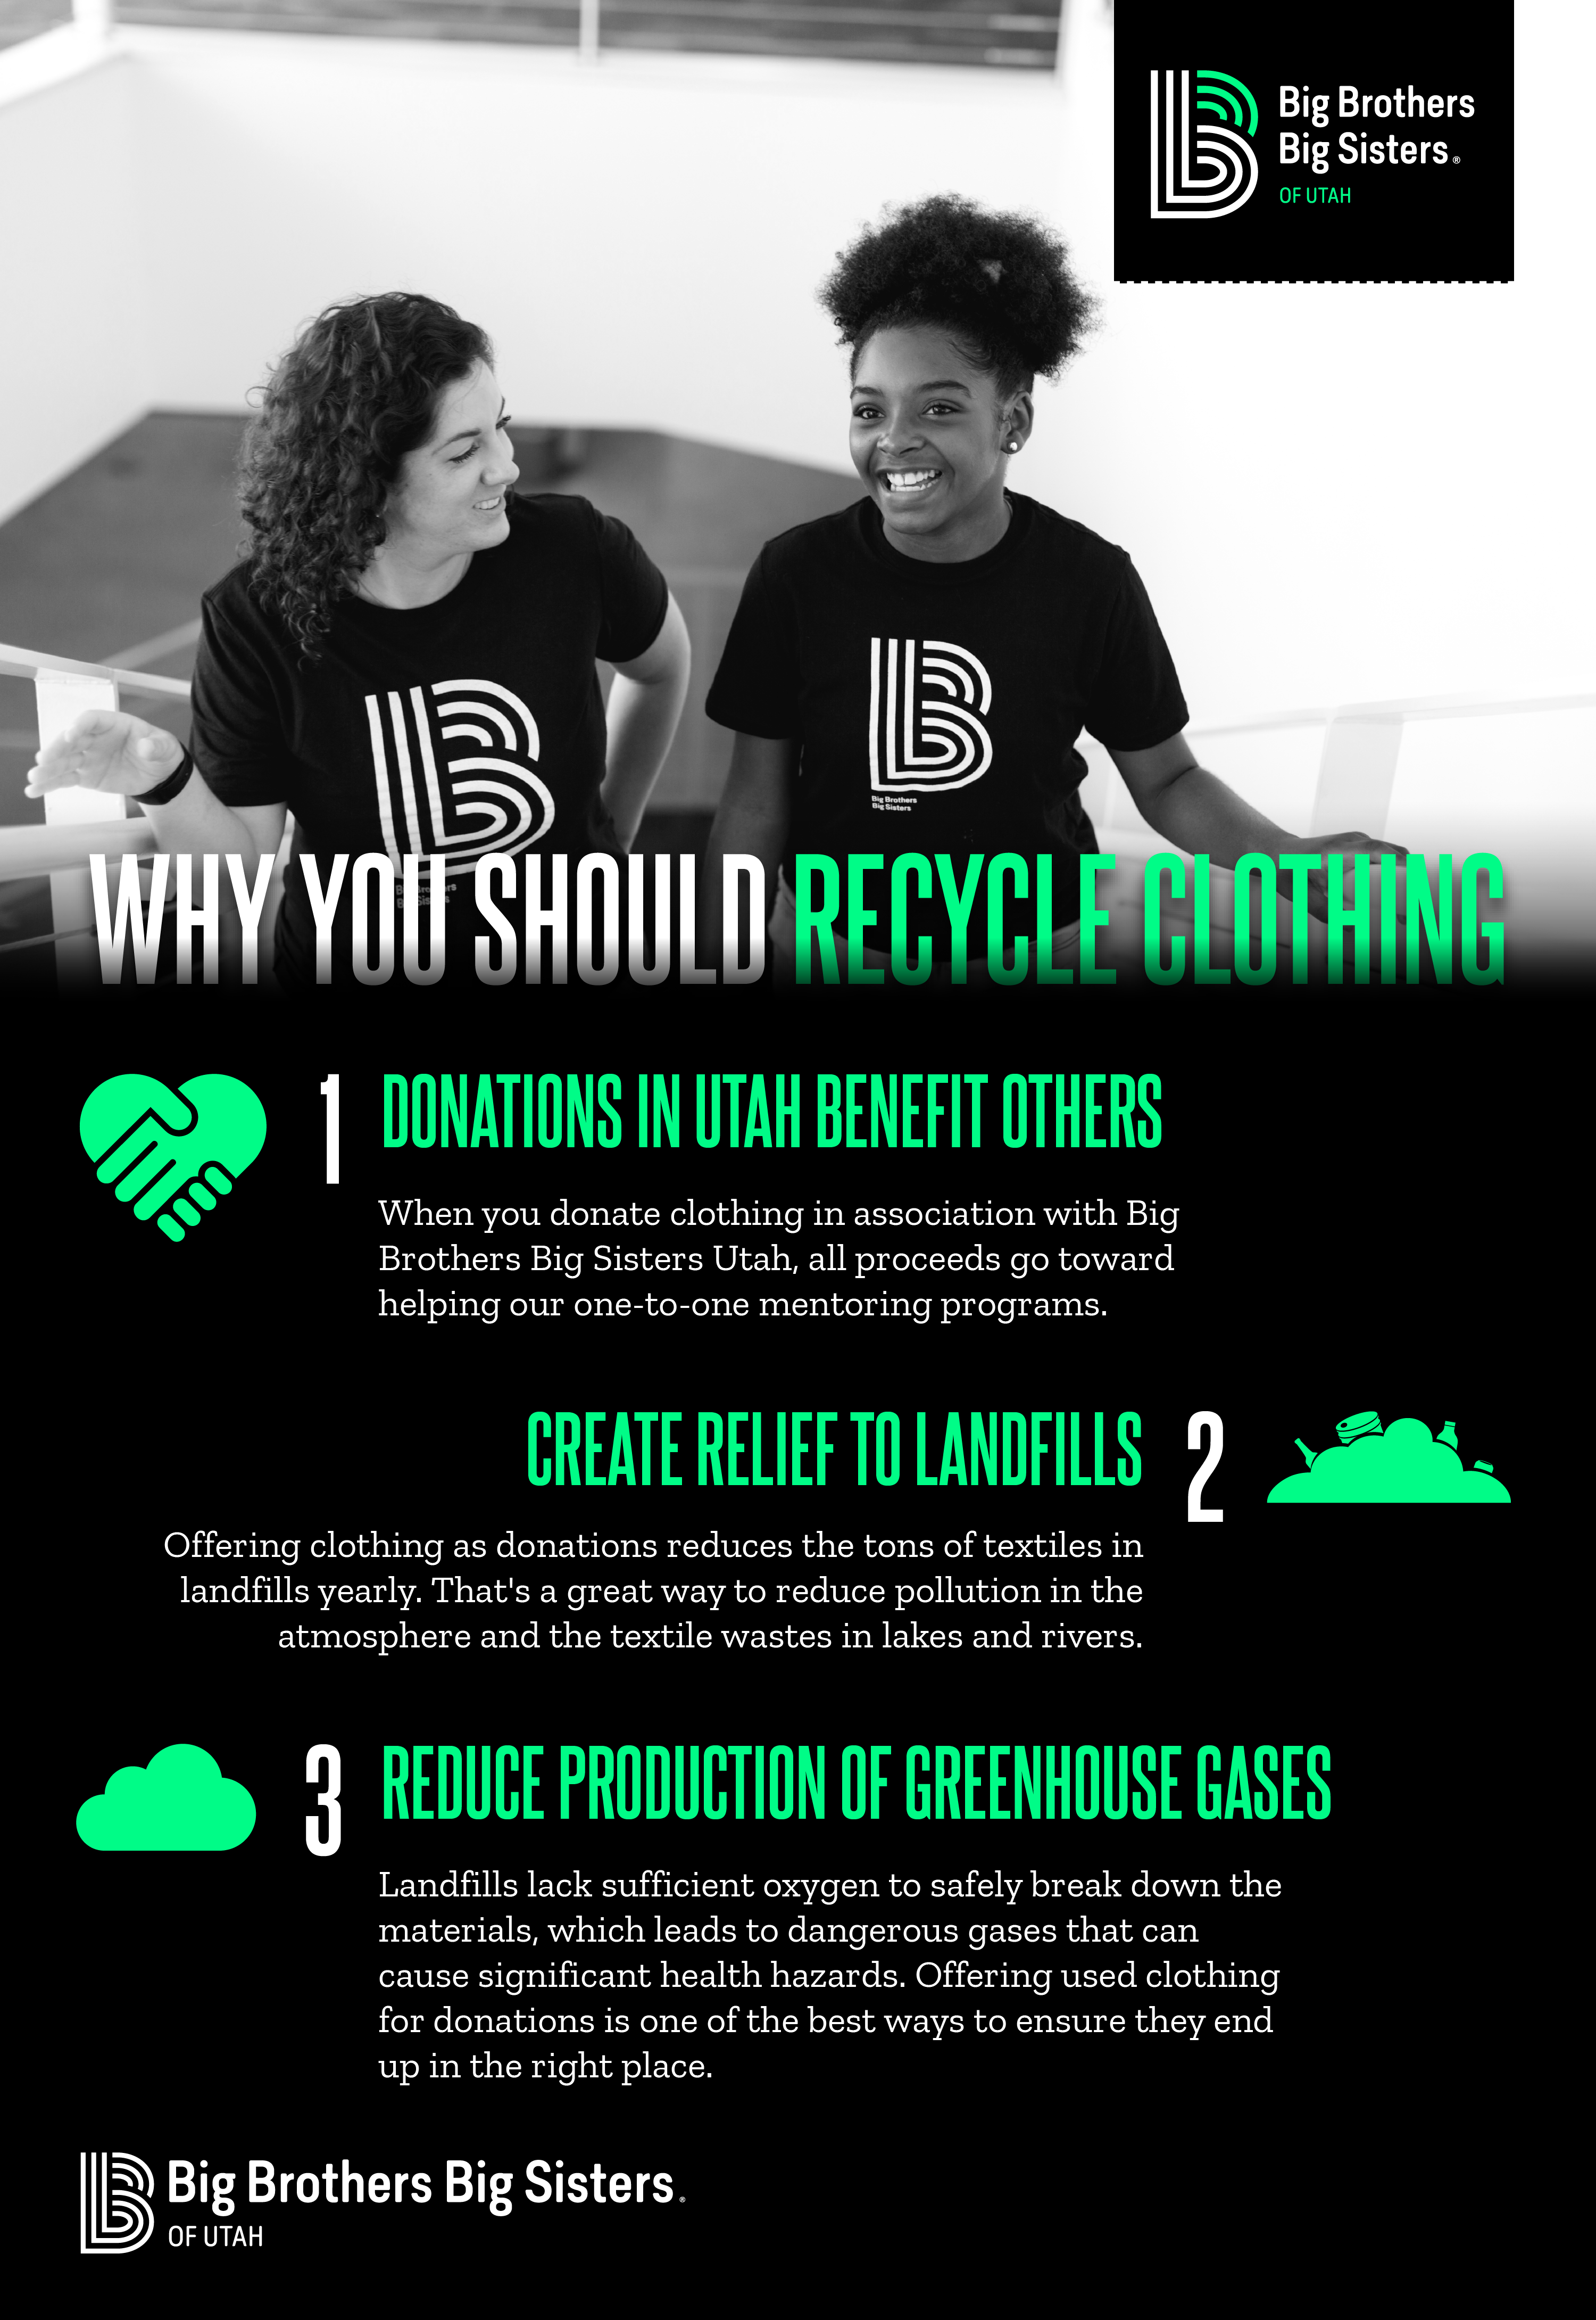 https://bbbsu.org/wp-content/uploads/2022/03/why-recycle-clothing-01-1.png